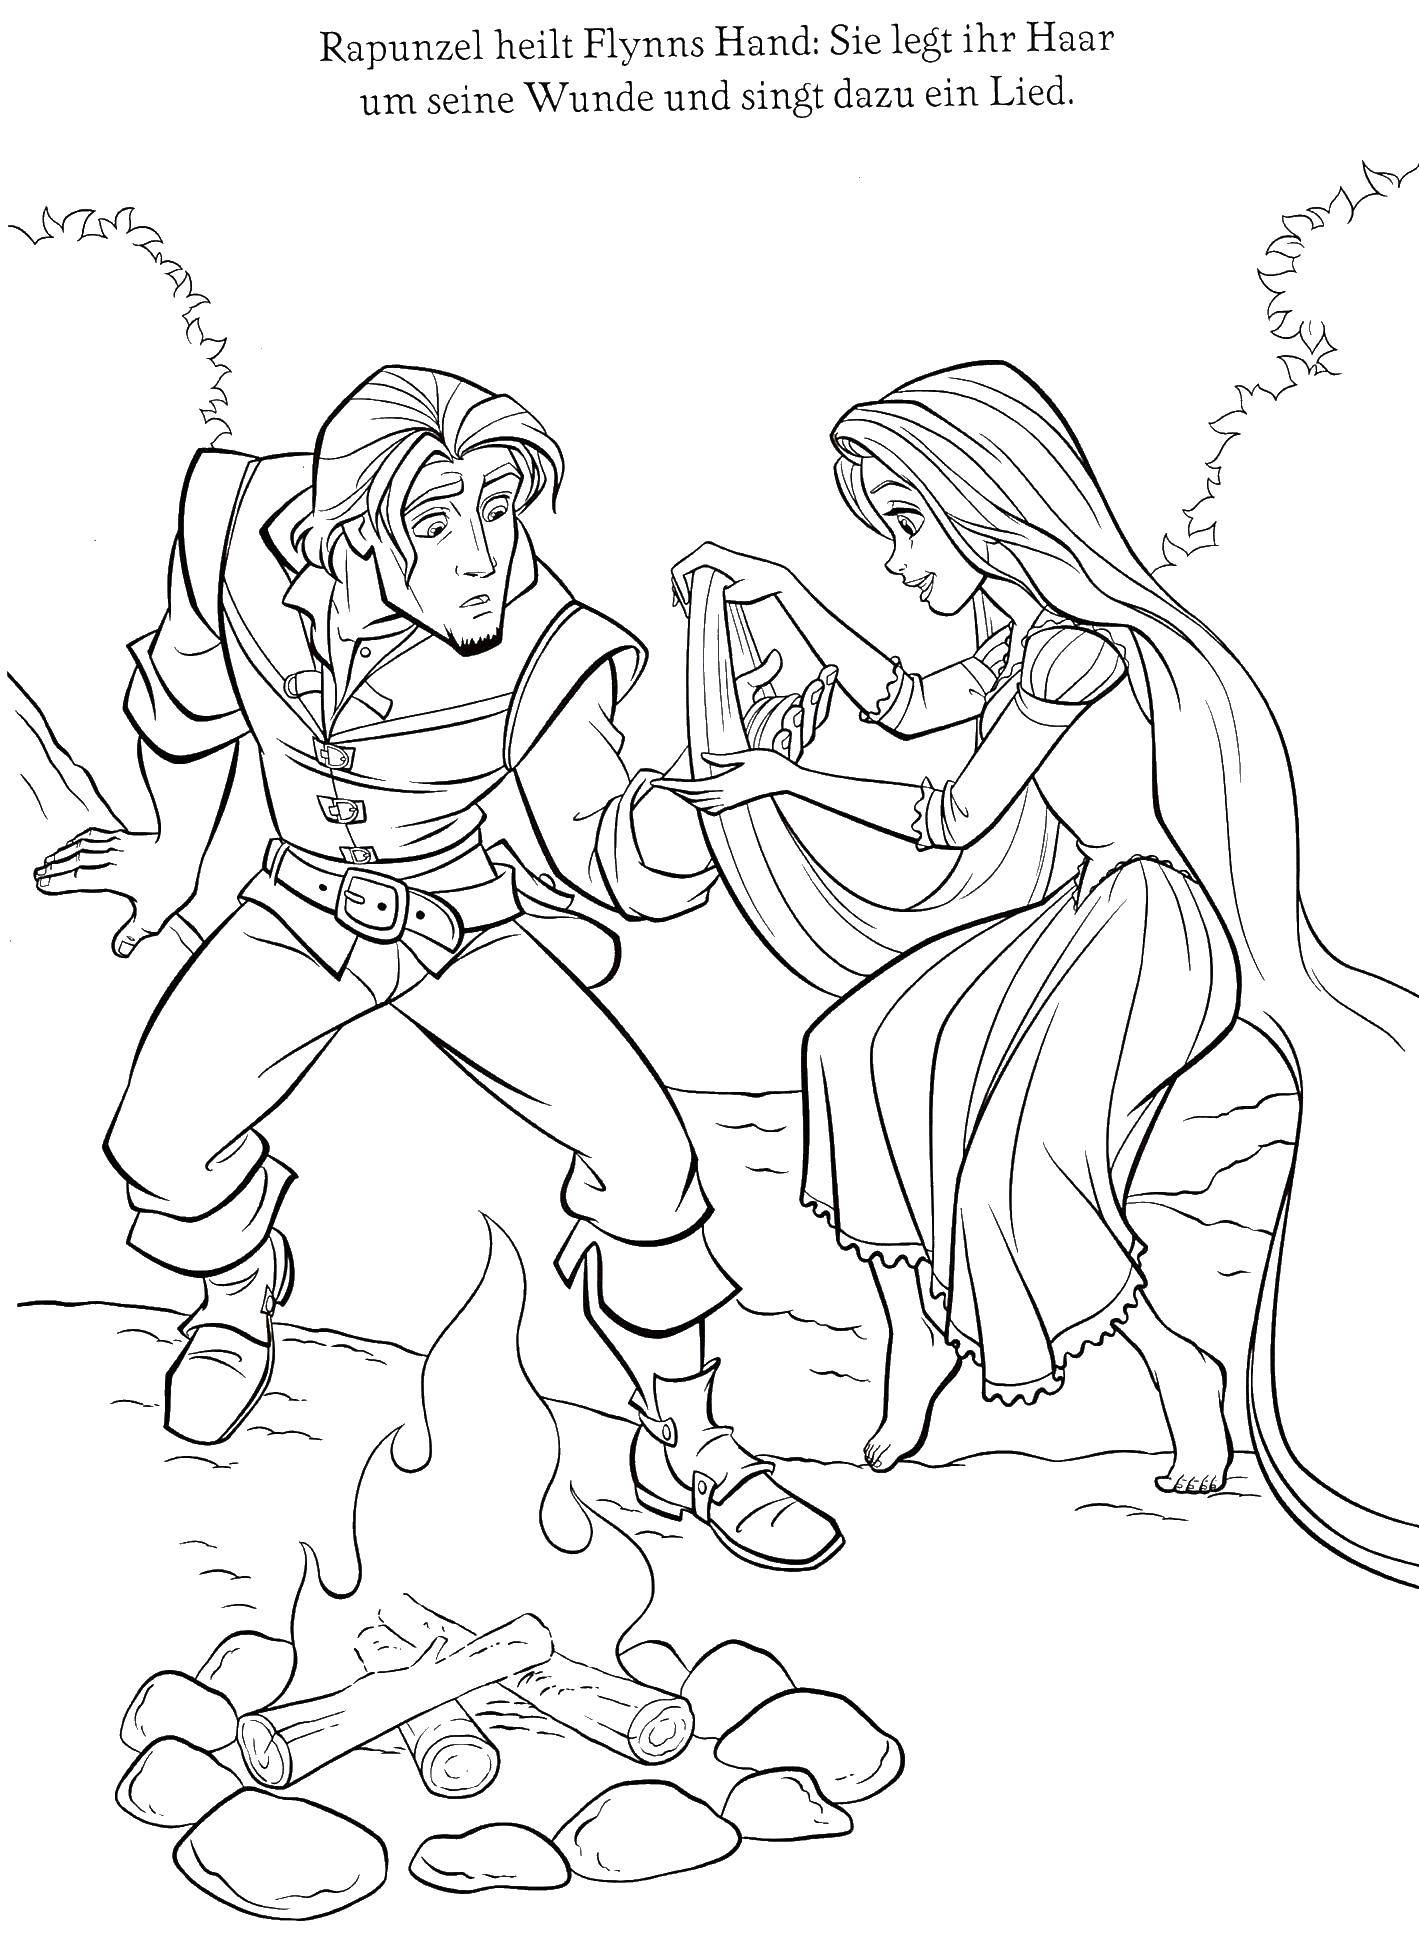 Coloring Rapunzel and Flynn. Category The characters from fairy tales. Tags:  Rapunzel , Flynn, fire.